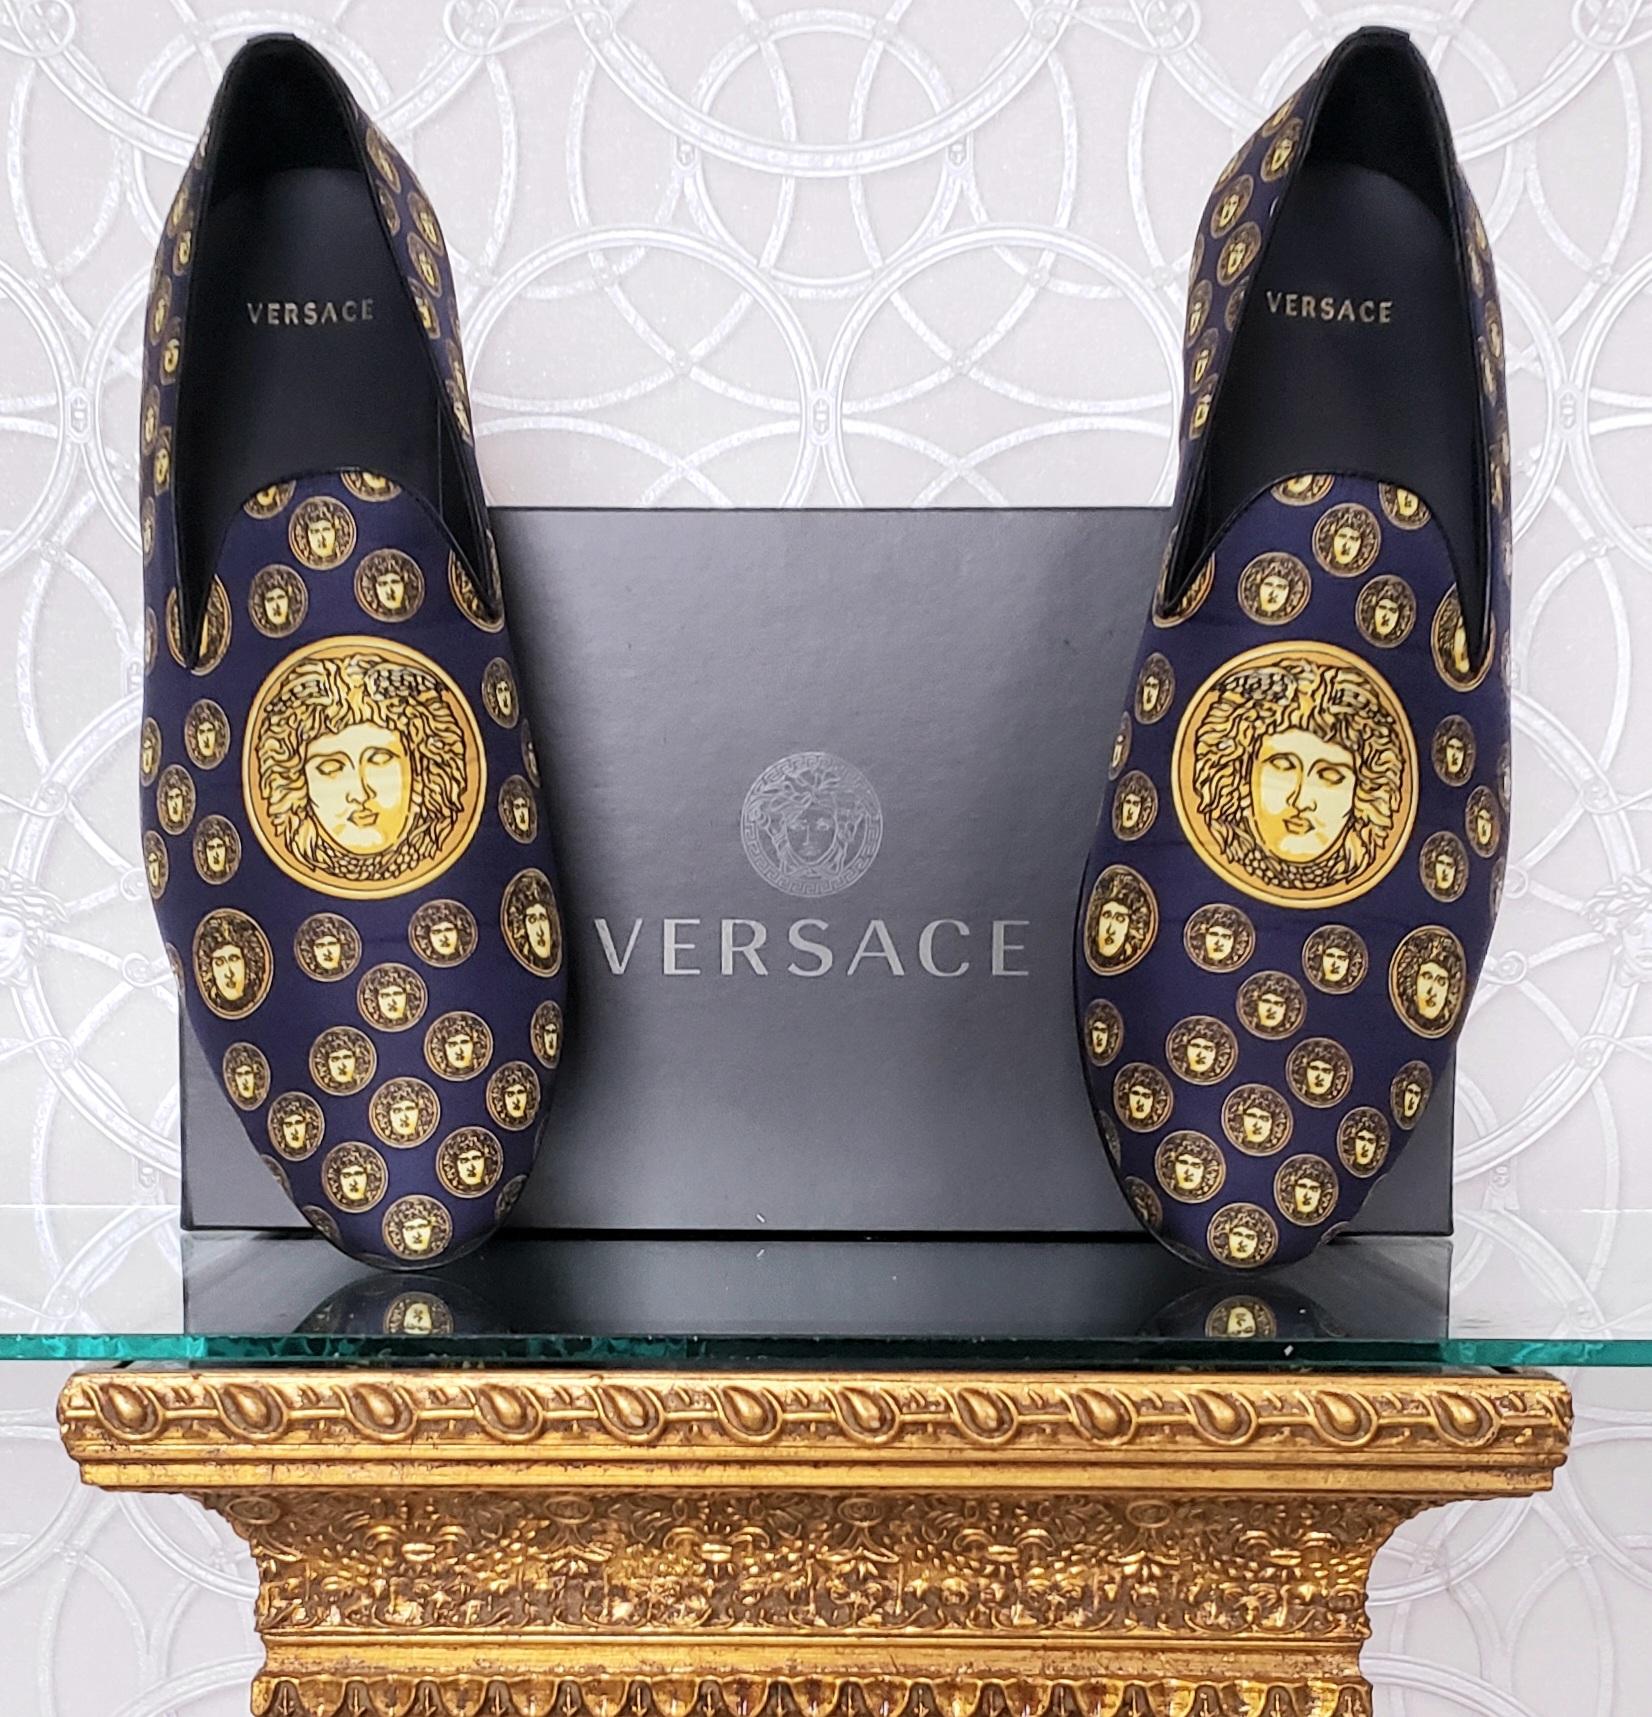 VERSACE

NAVY BLUE SILK LOAFERS w/GOLD MEDUSA PRINT 

Exclusive navy blue/gold colorway
Stacked heel
Almond toe
Slip-on style

Content: silk upper
Lining: 100% leather



Made in Italy

Italian Size is 44 - US 11    
insole 11 1/4